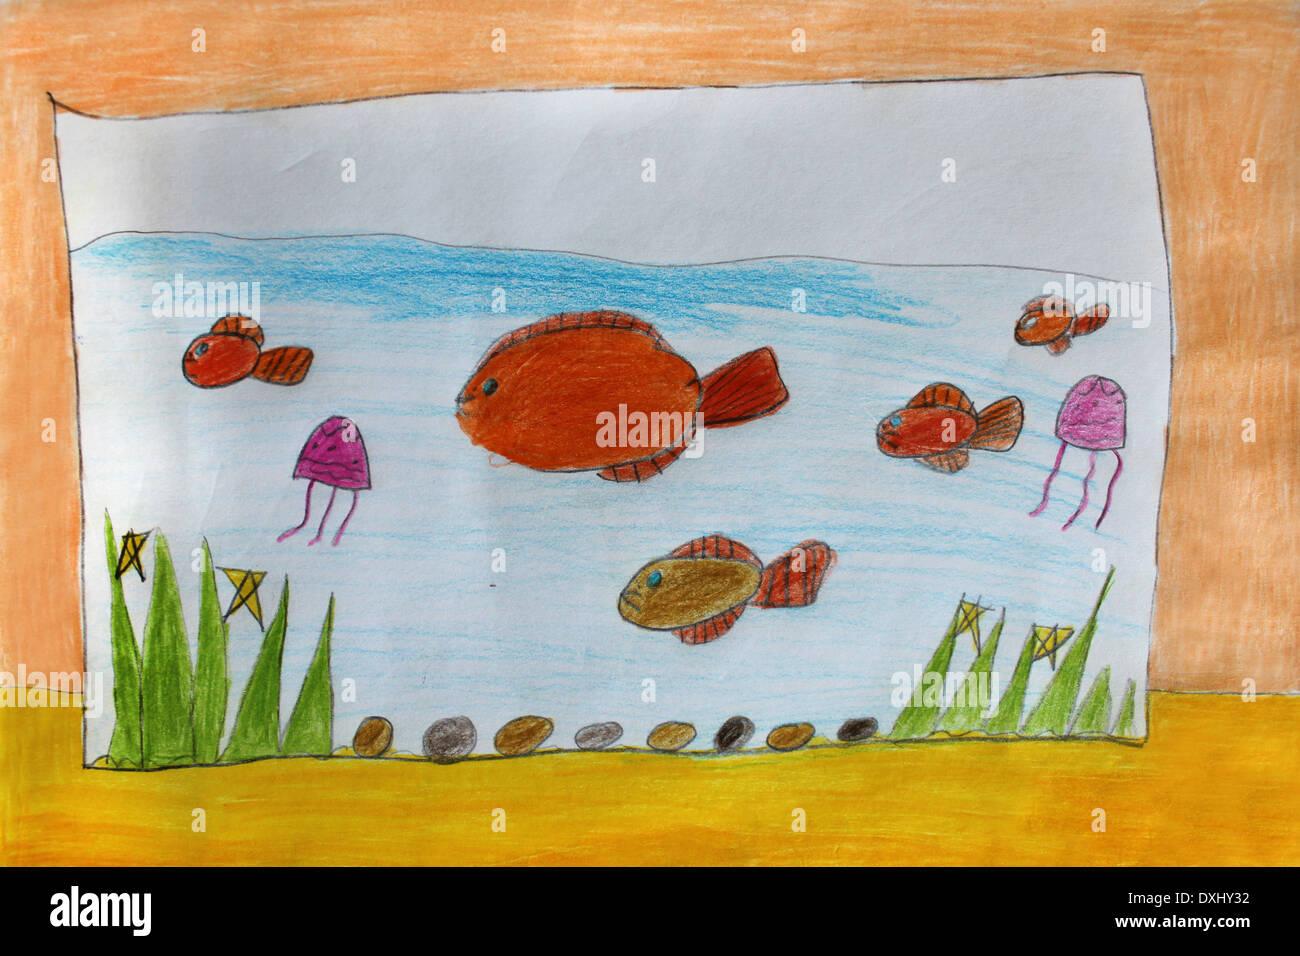 Multicolored child's drawing with fishes in the aquarium Stock Photo